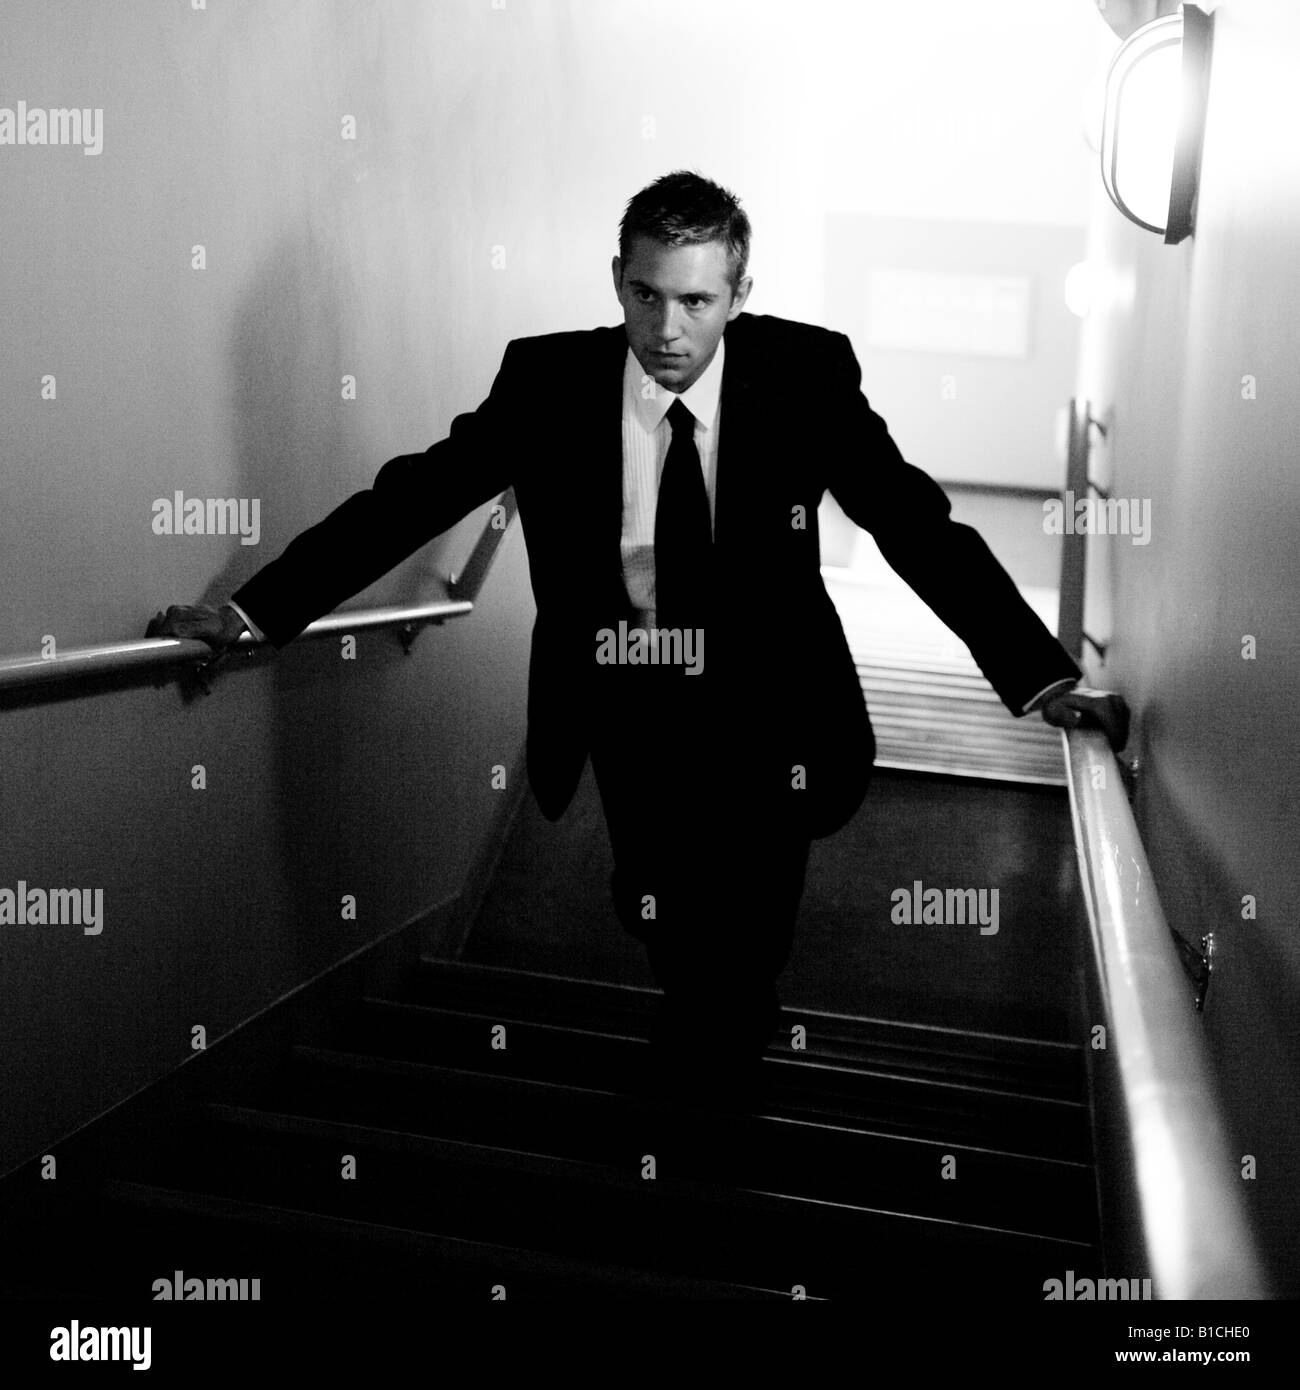 man in a dark suit ascends a shadowy stairwell Stock Photo